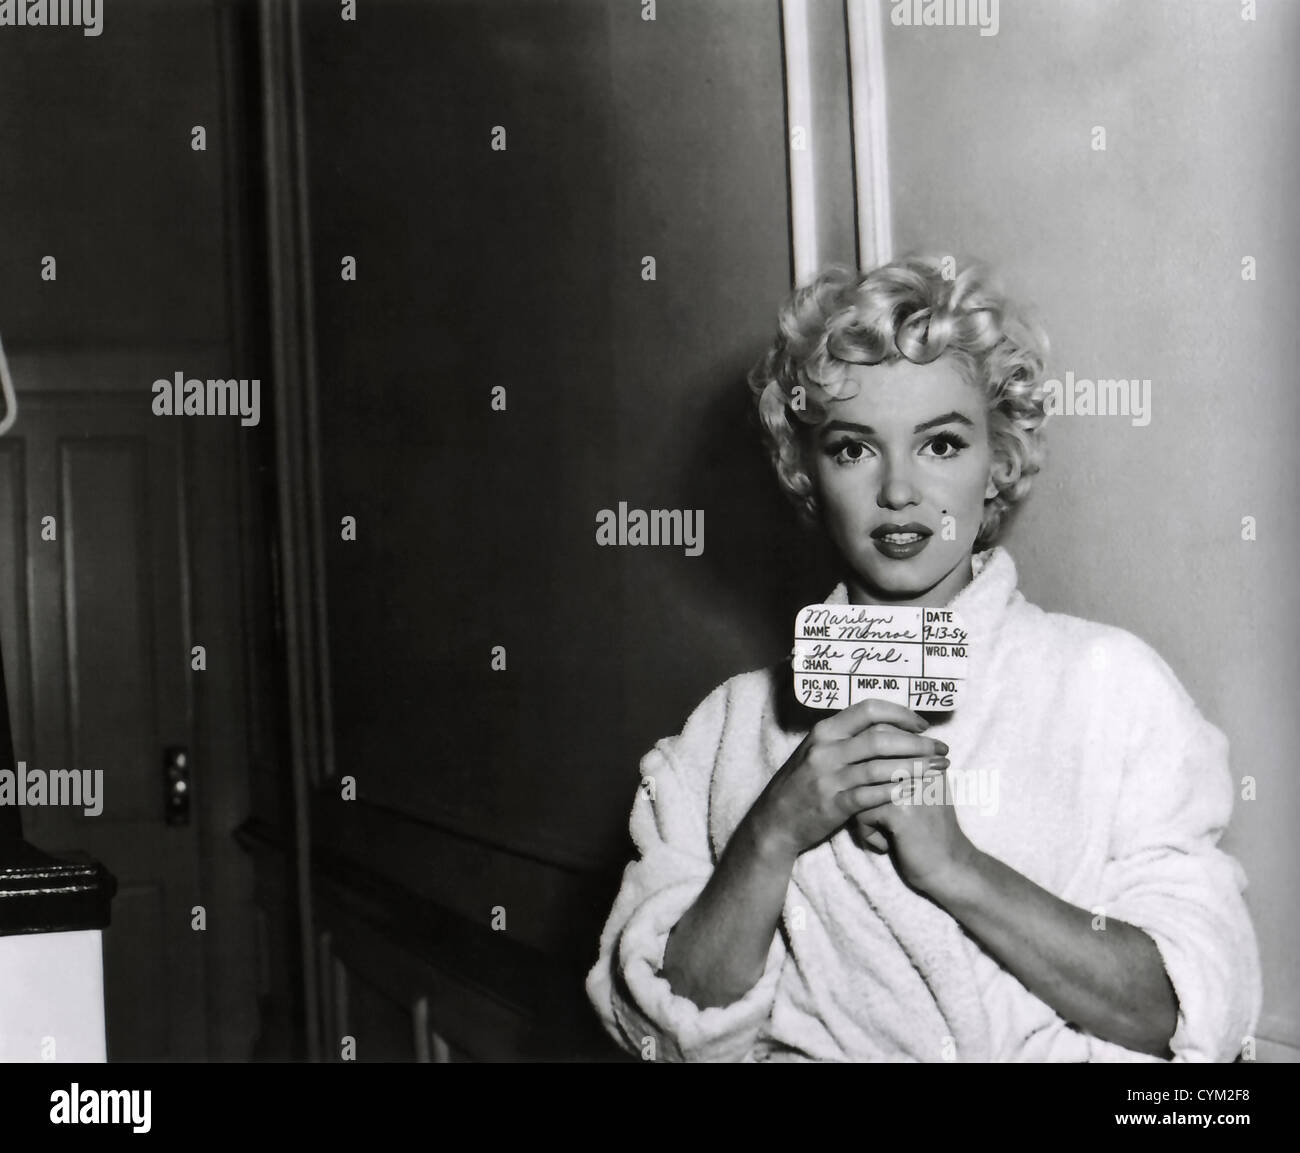 Marilyn Monroe The Seven Year Itch 1955 Director: Billy Wilder Stock Photo